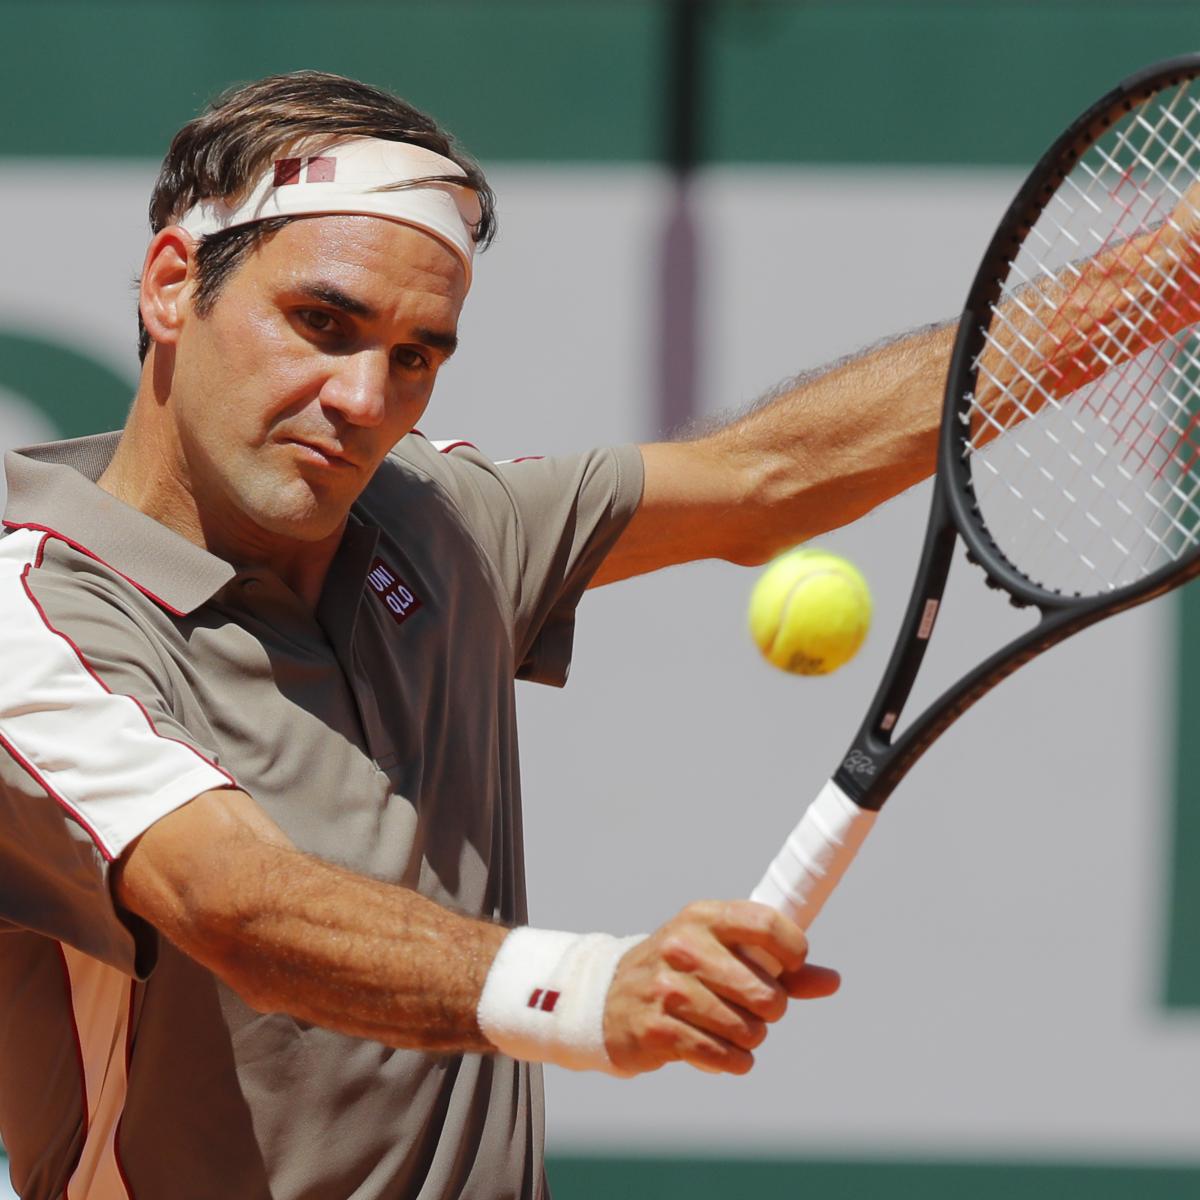 French Open 2019: Sunday Replay TV Schedule and Live ...